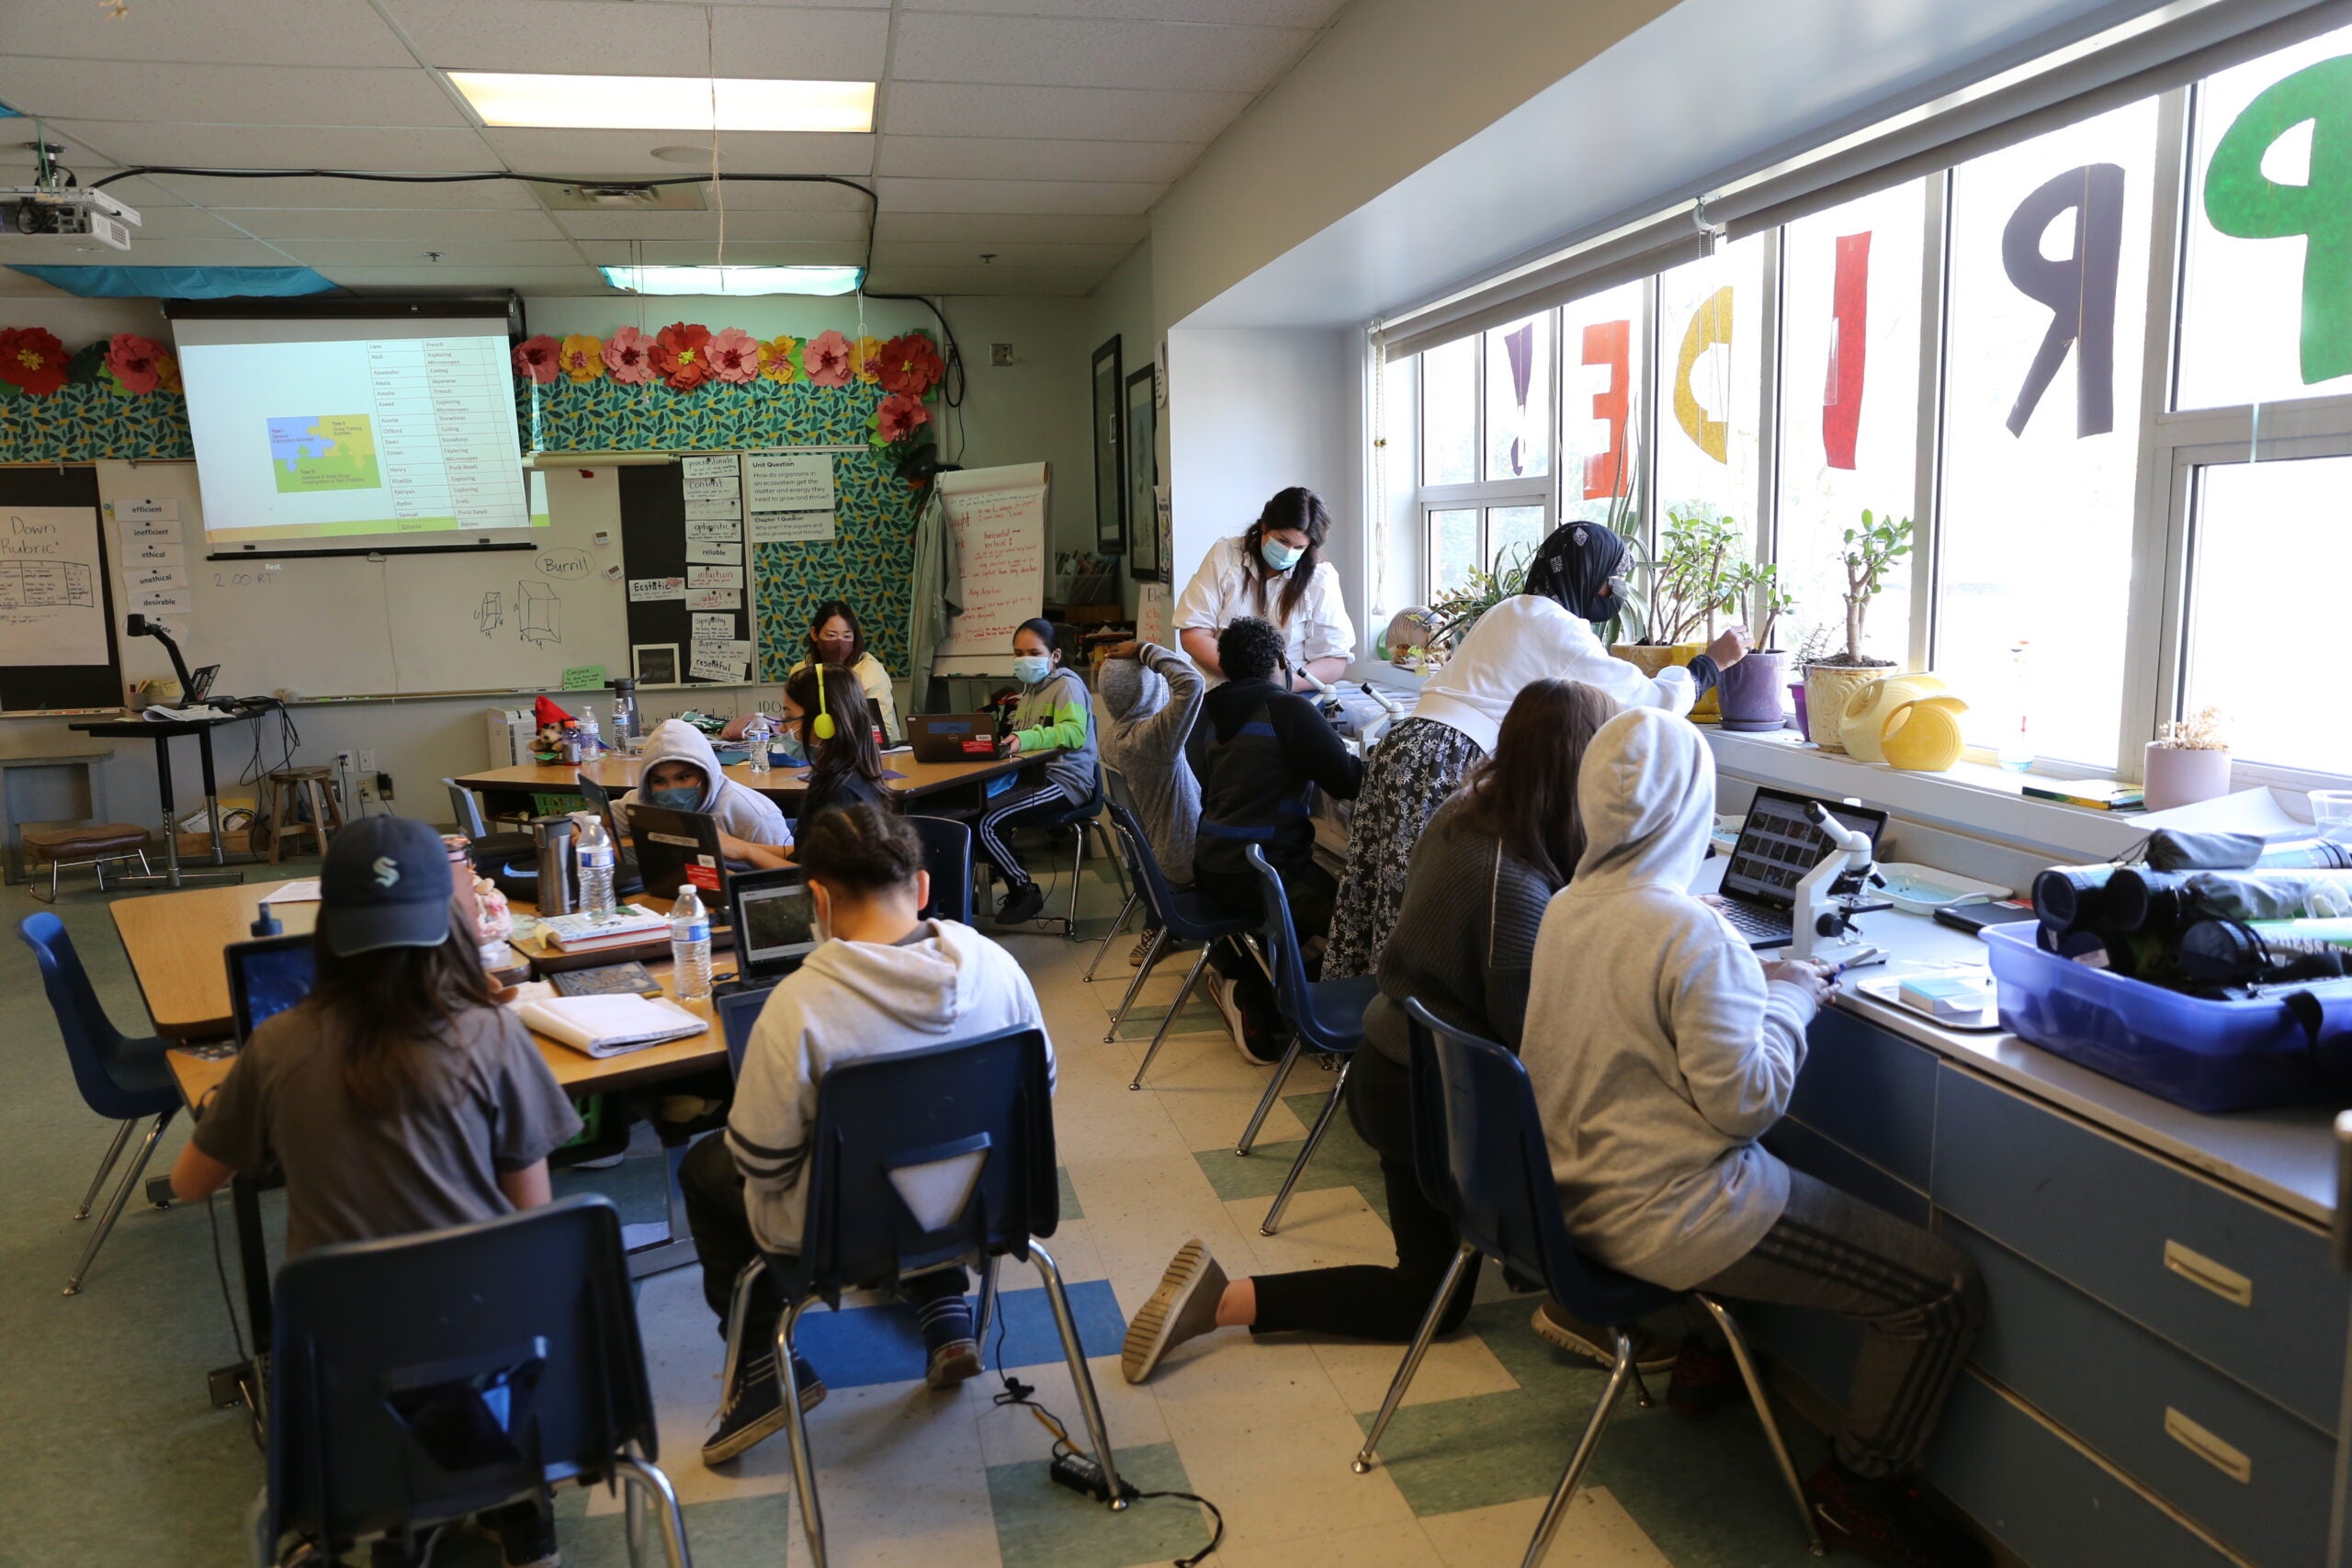 Students in Sam Egelhoff's fifth grade class at Thurgood Marshall meet in enrichment clusters around the classroom